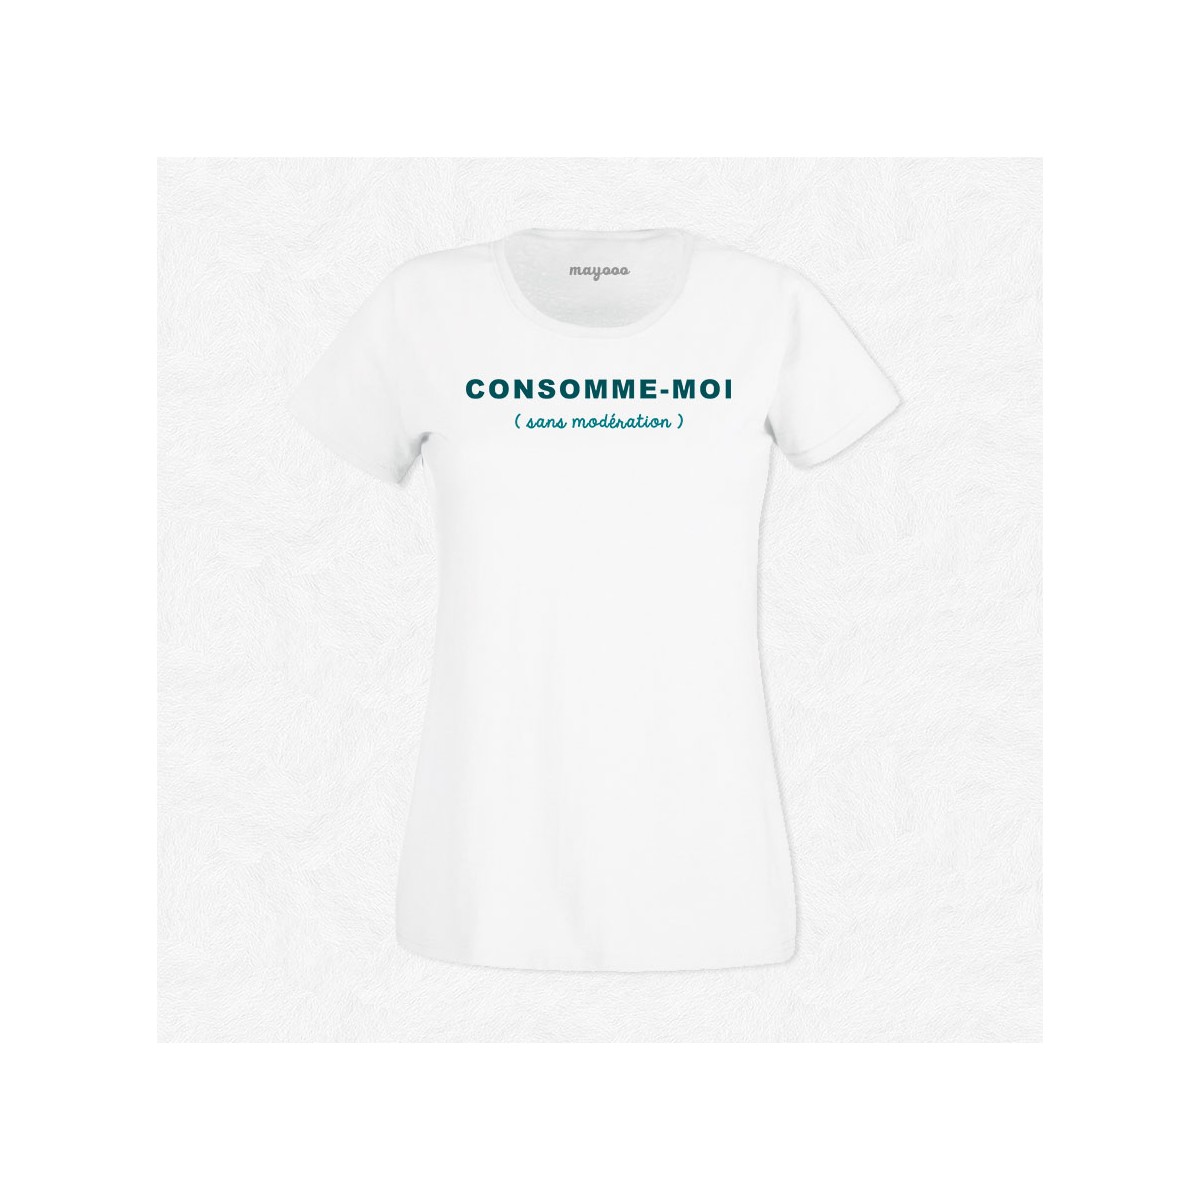 T-shirt Consomme-moi